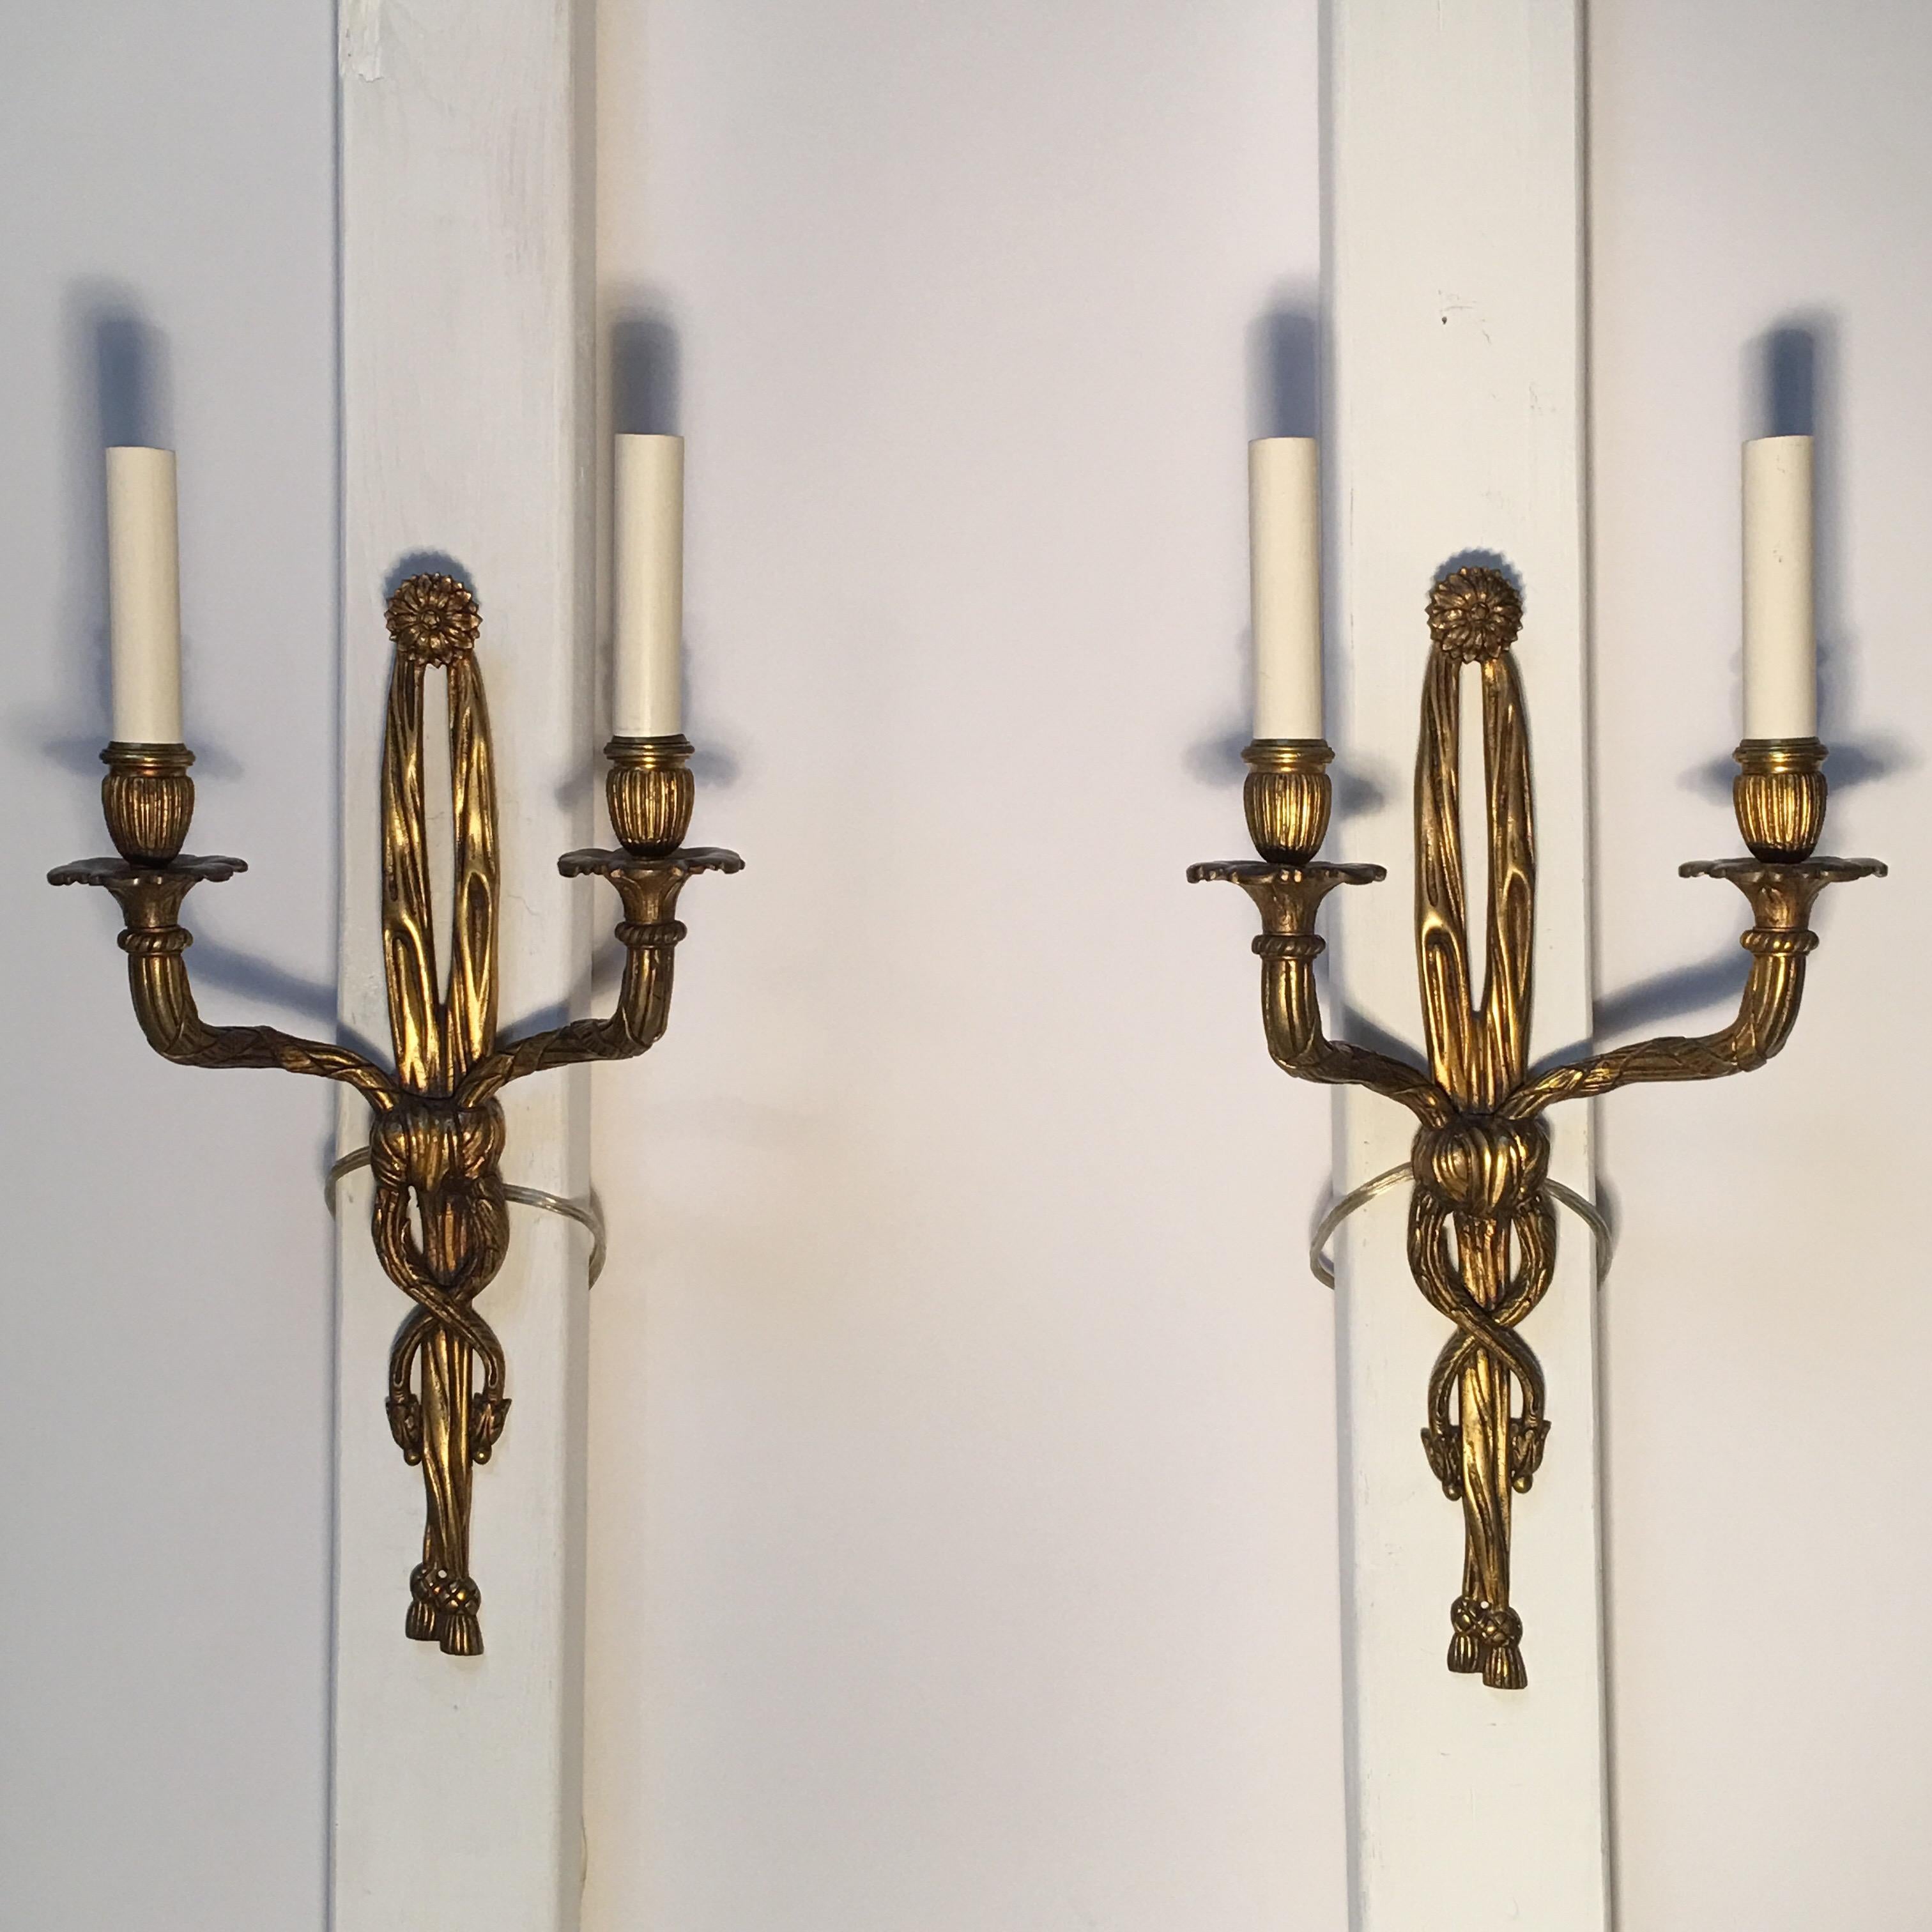 A pair of two-arm French bronze Louis XVI style wall sconces.